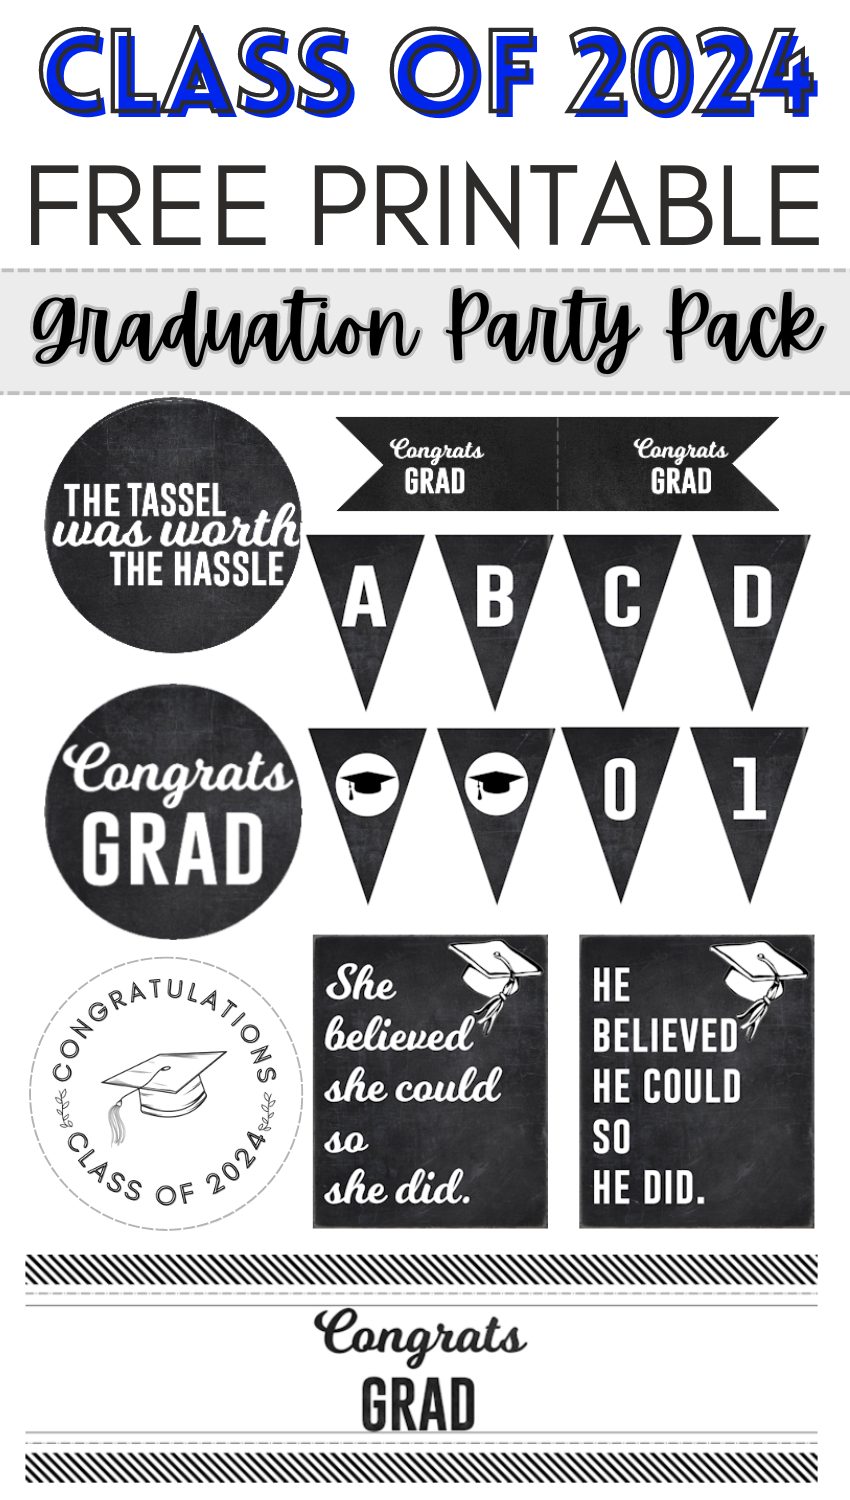 Class of 2024 Free Printable Graduation Pack